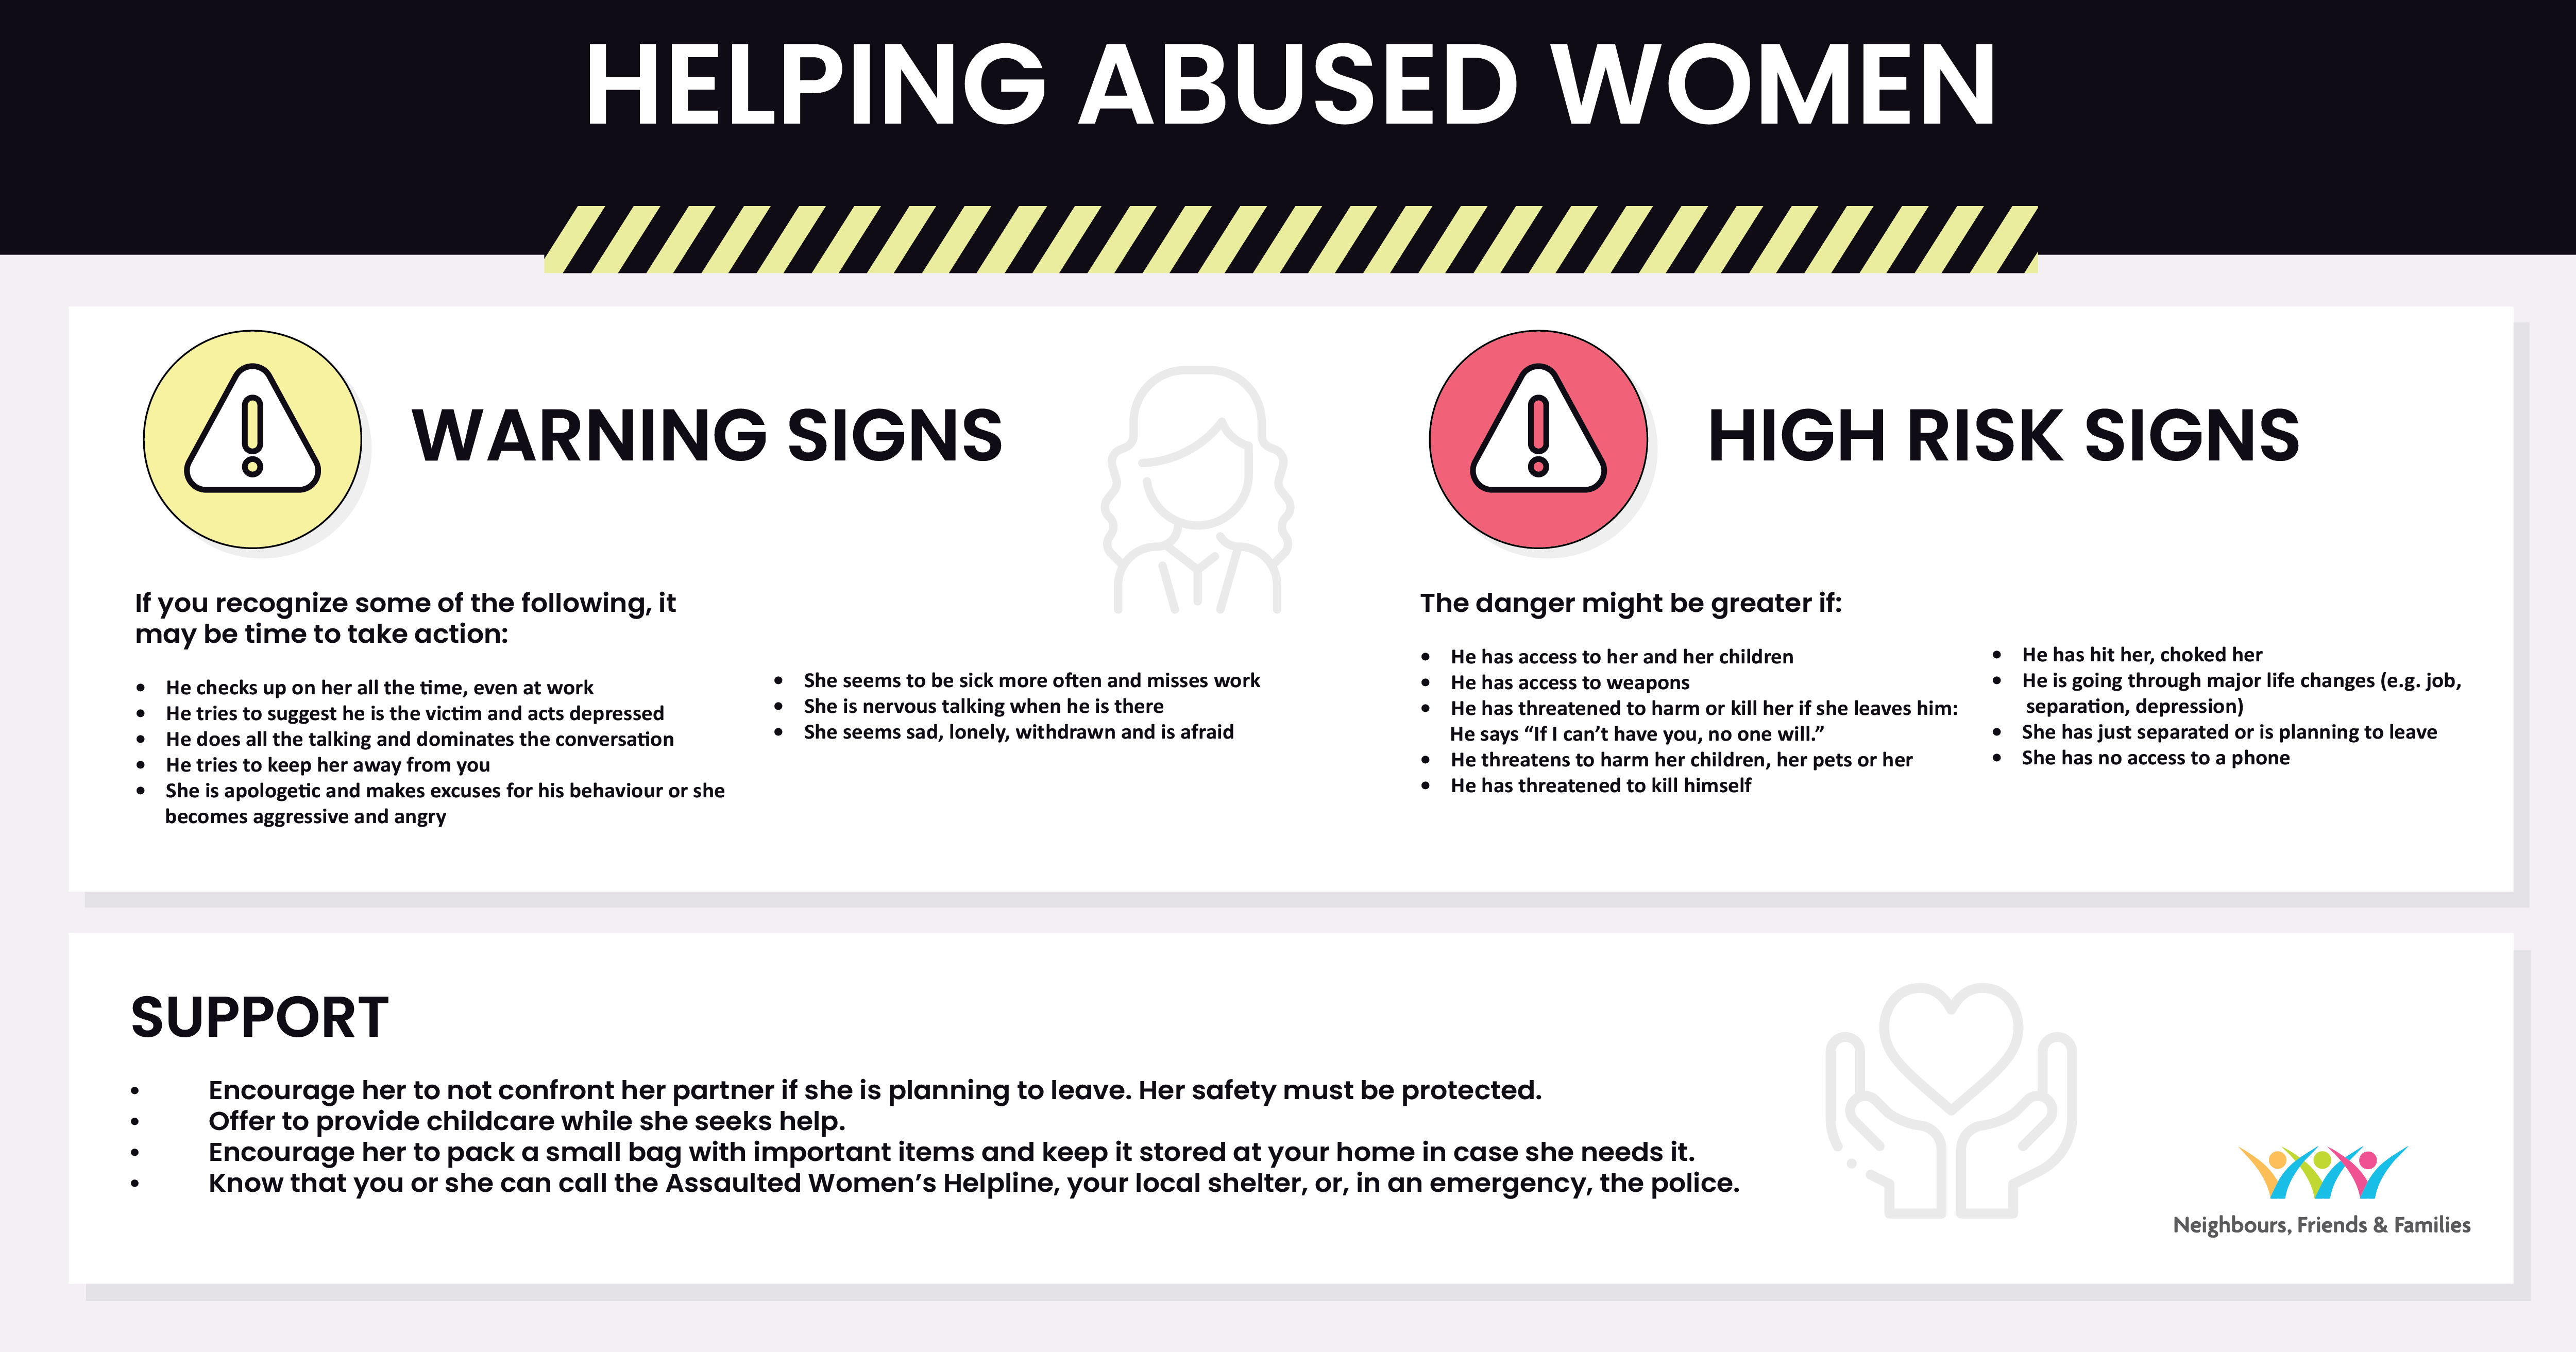 helping abused women infographic